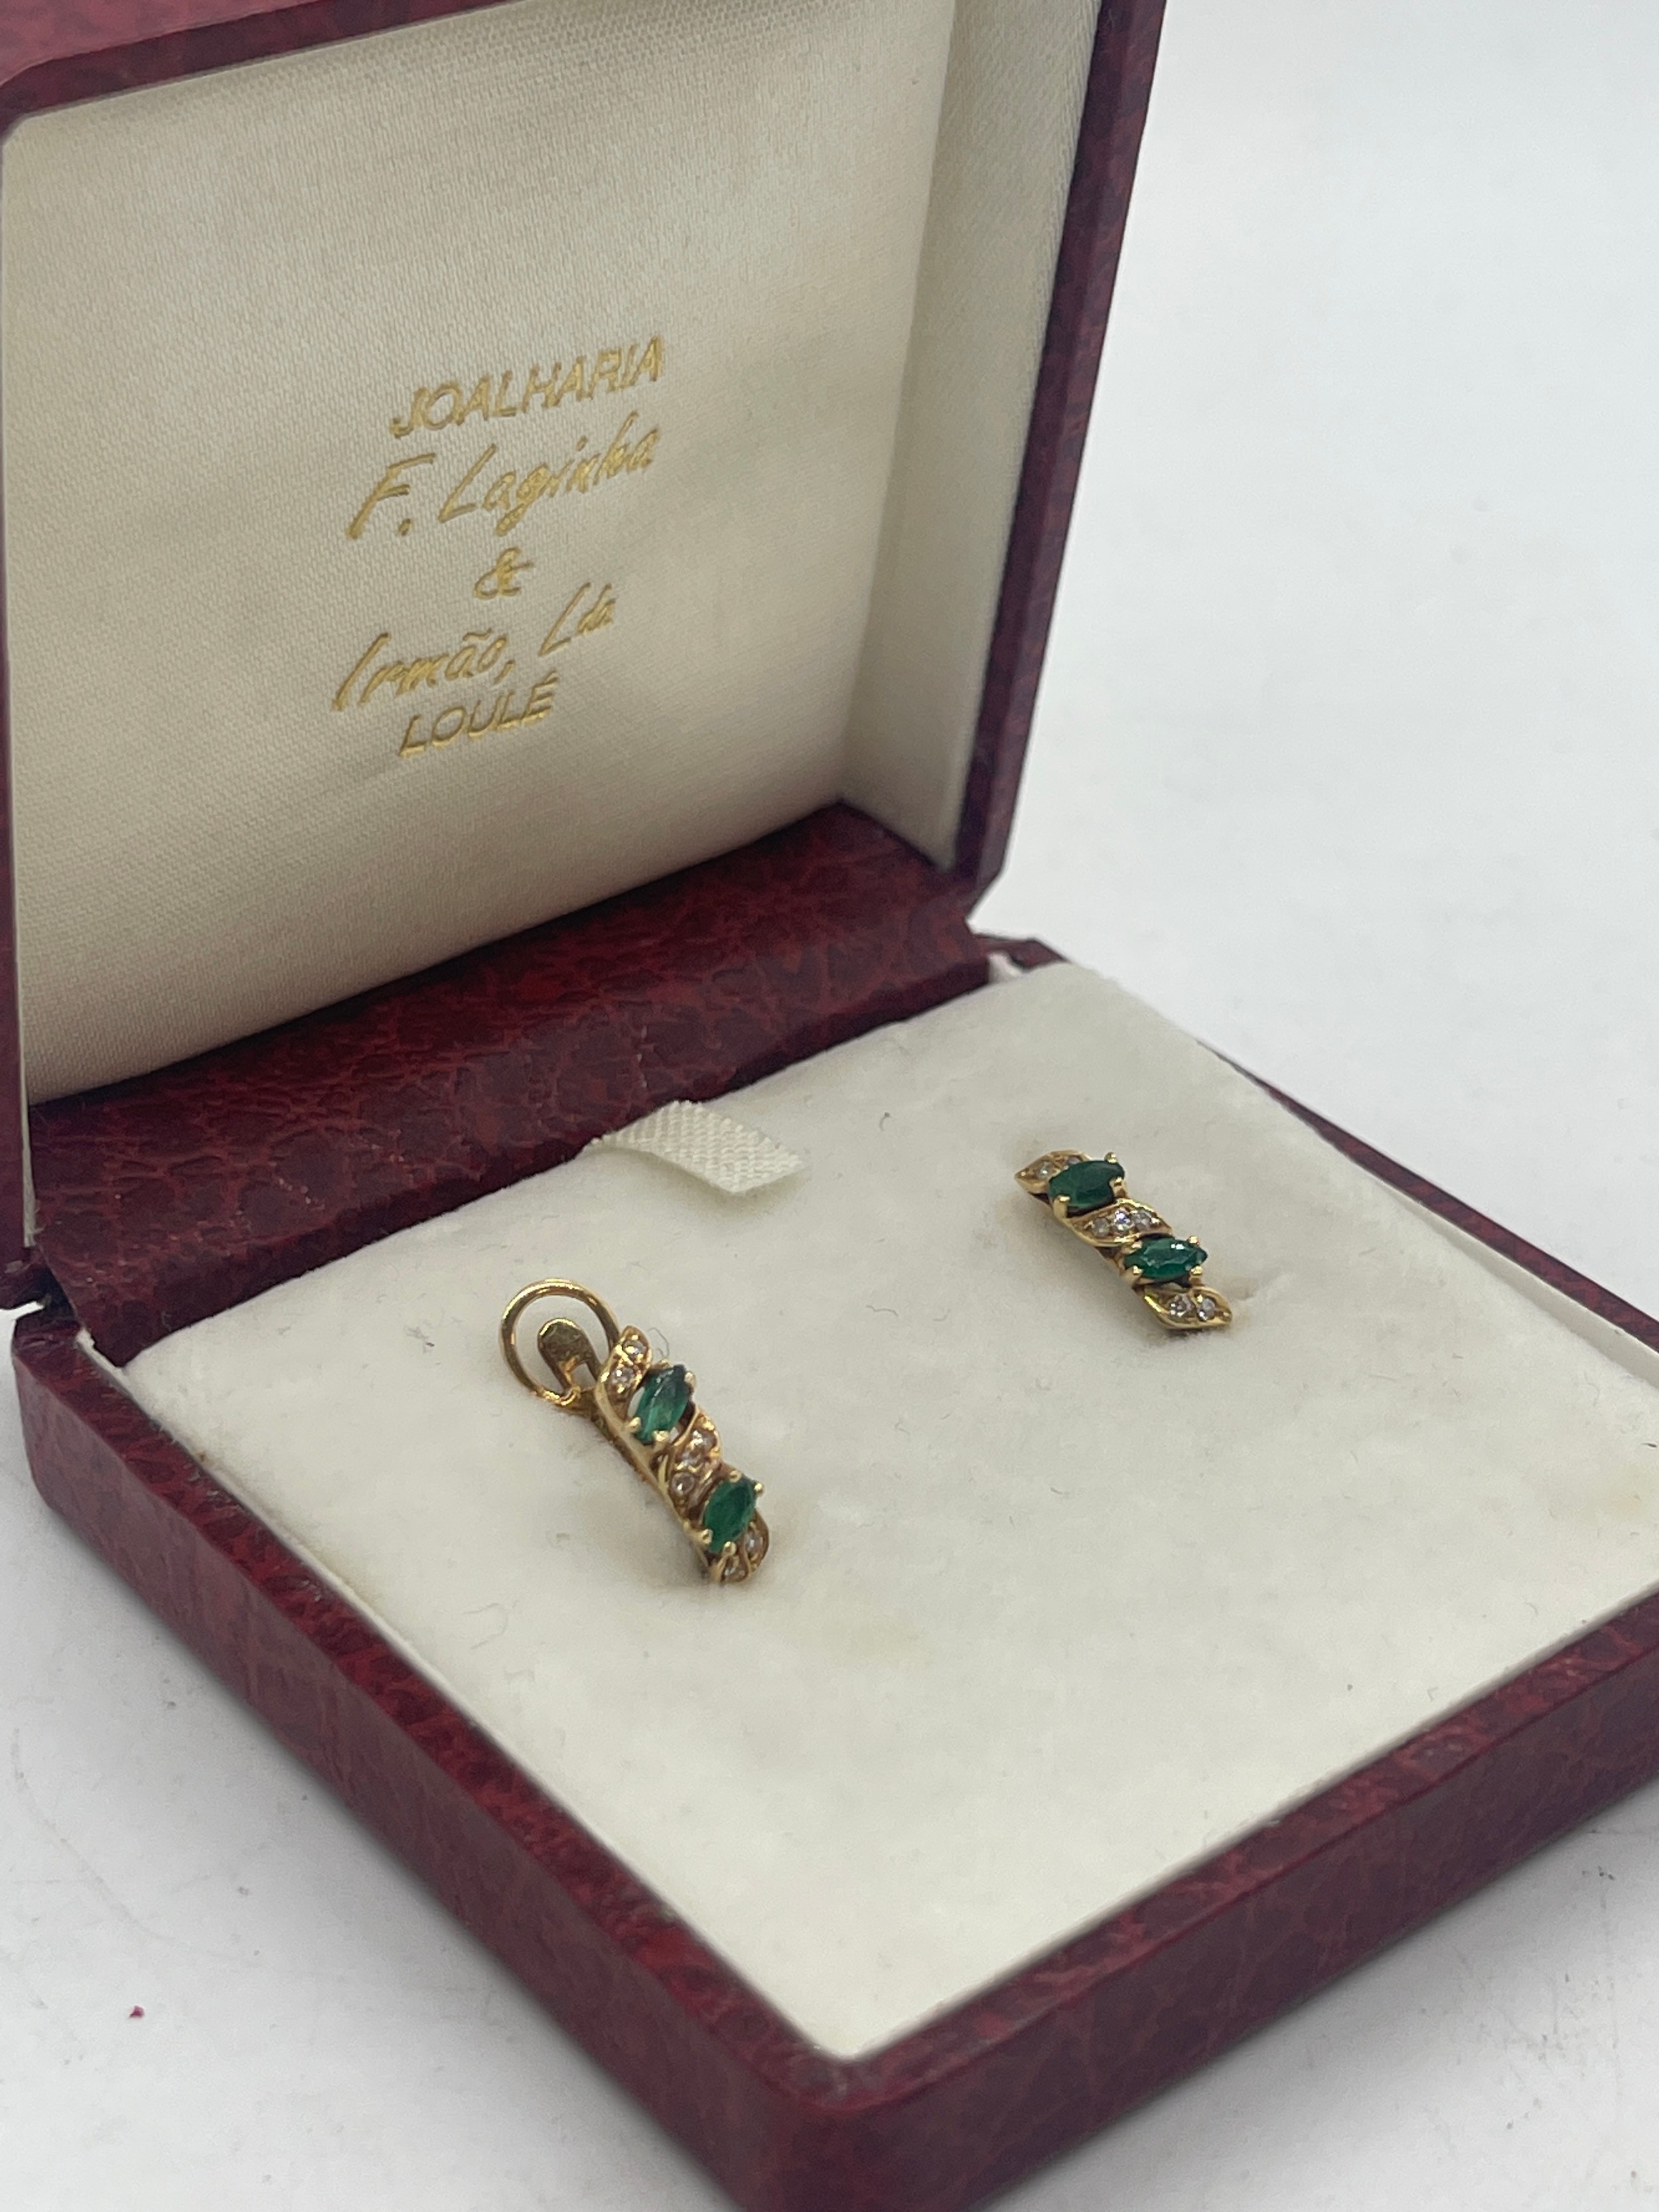 Pair of 18ct diamond and emerald earrings 2.9 grams - Image 2 of 7